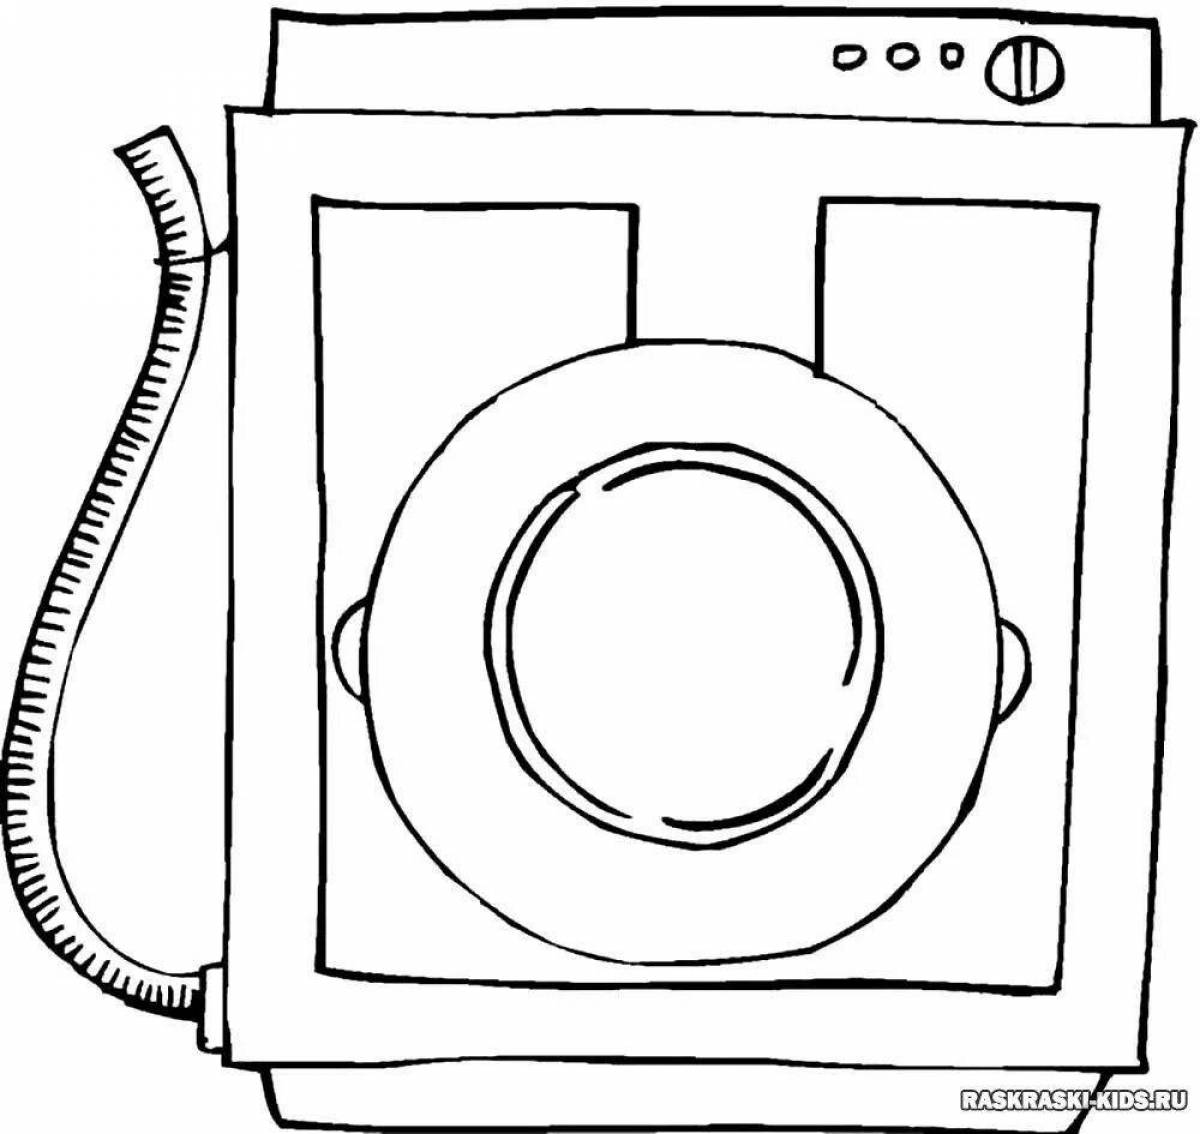 Coloring book funny electrical devices